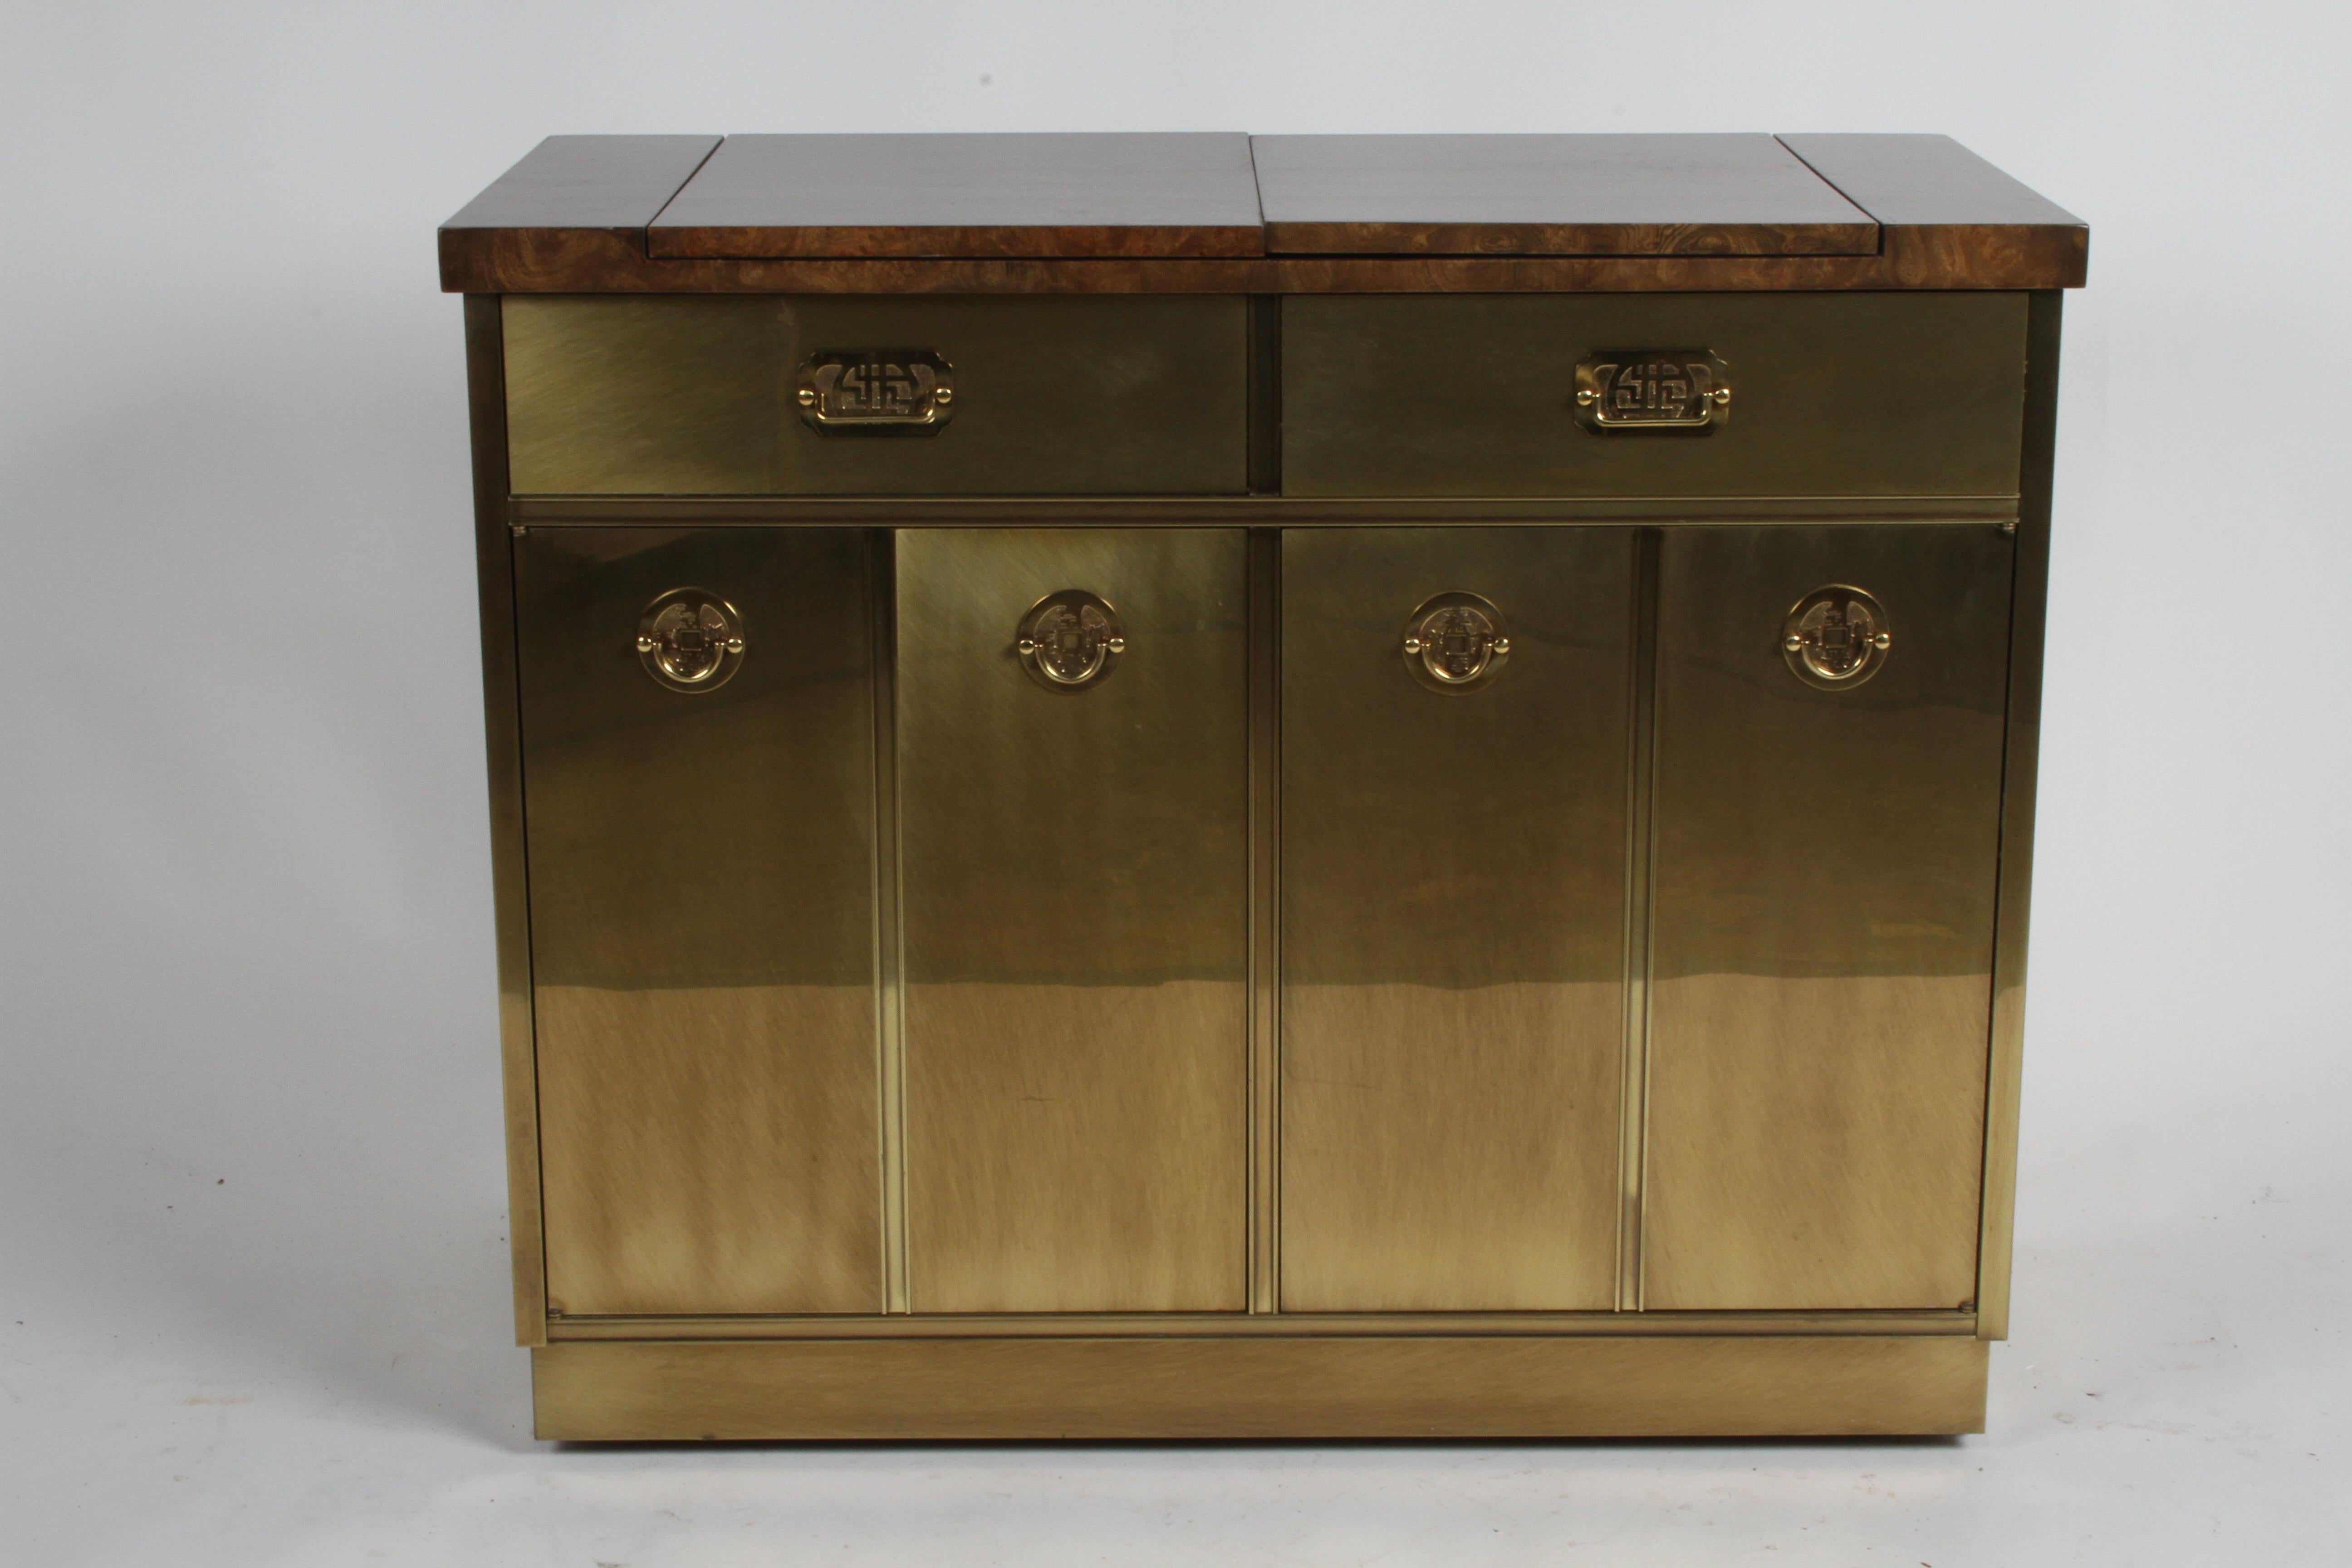 Beautiful 1970s Mastercraft dry bar, cart or server with warm factory applied patina to the brass cladded cabinet and elm burl veneer flip top for extra serving space. Drawers and doors have Asian inspired hardware, lower cabinet has two doors that